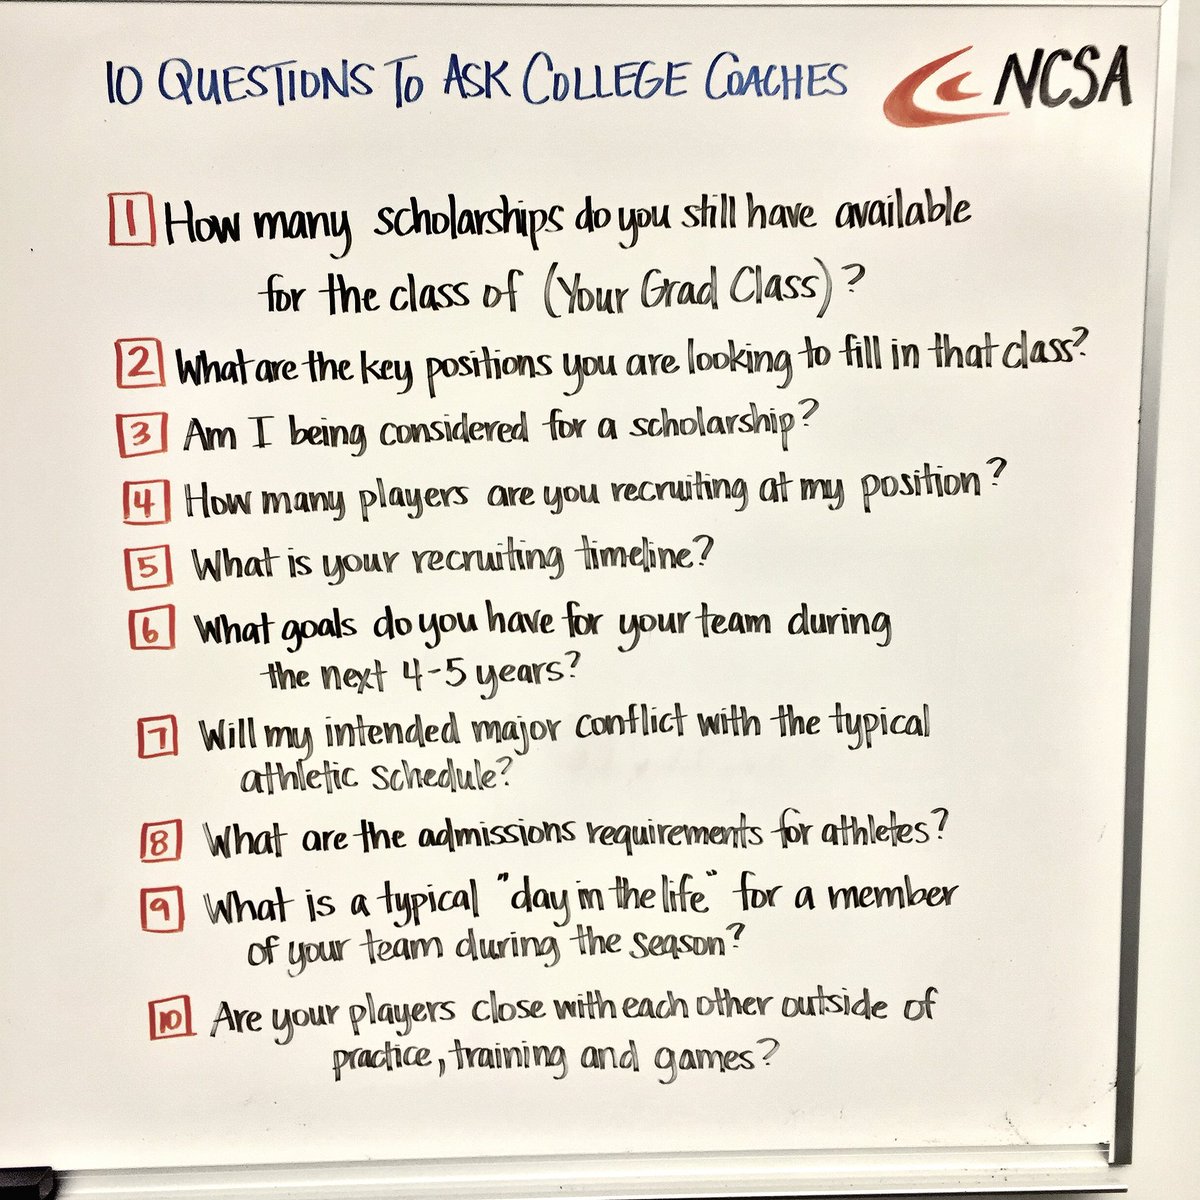 NCSA College Recruiting on Twitter: 